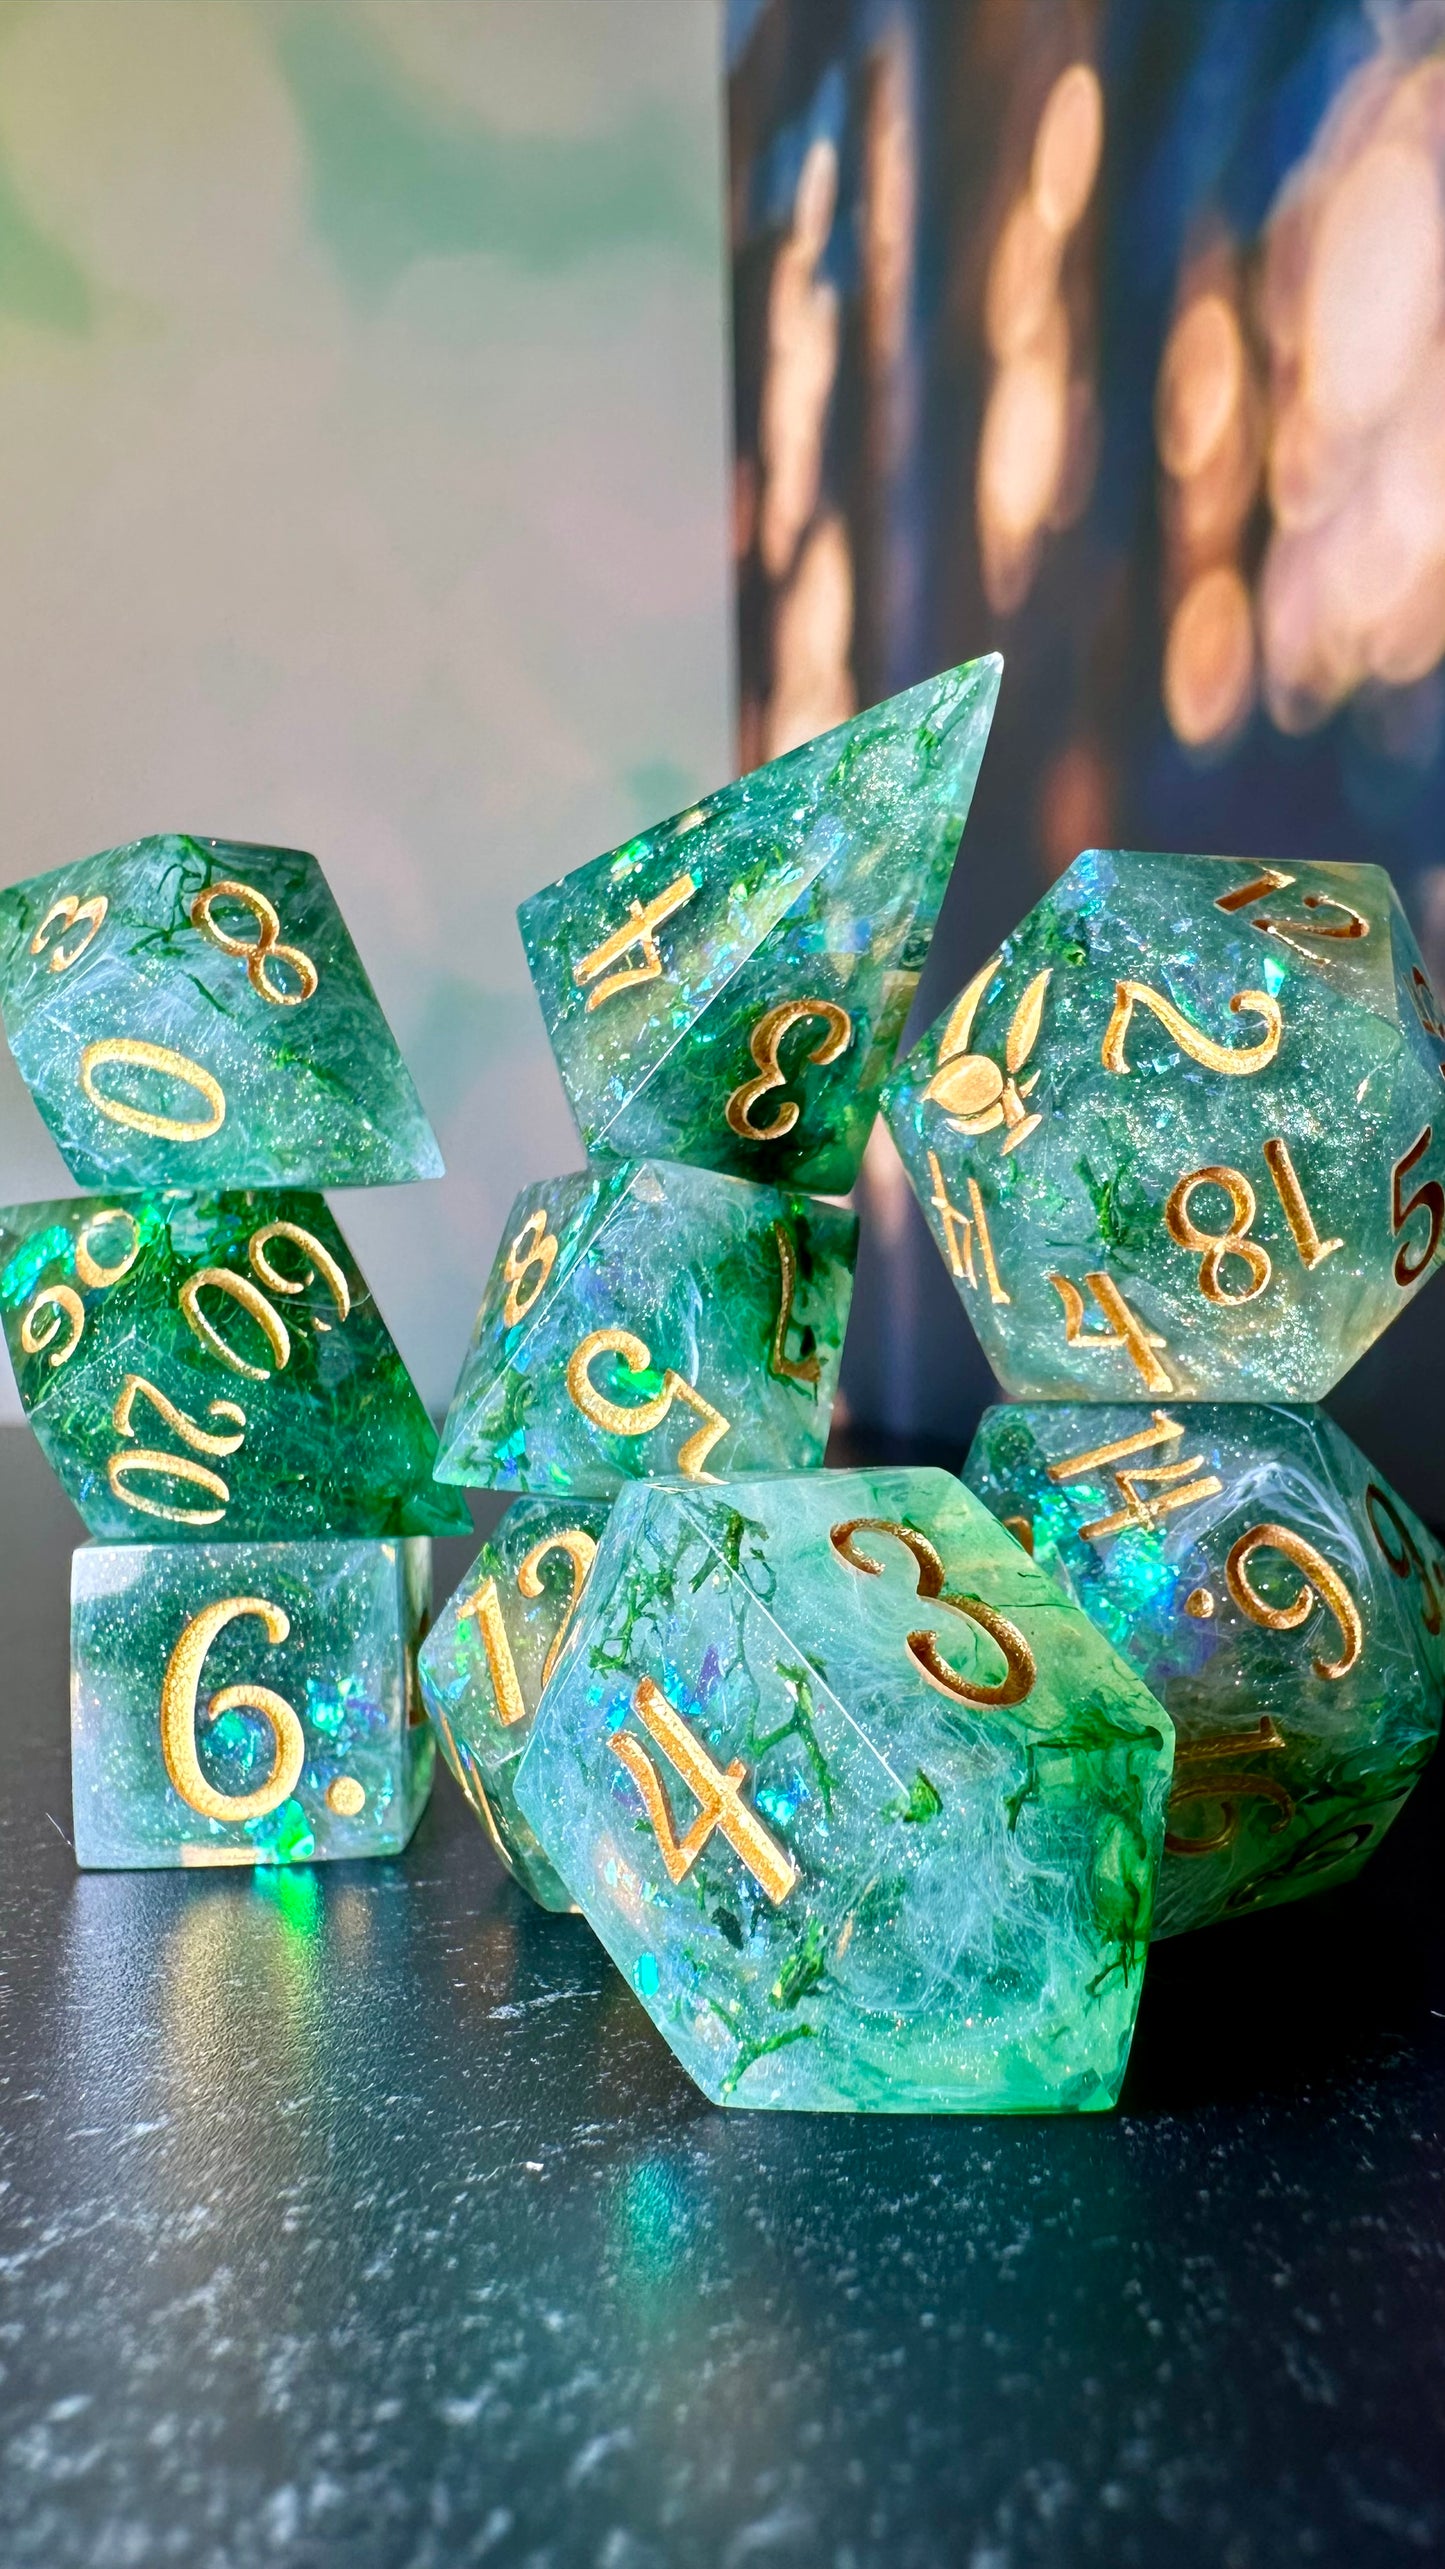 Ithan Holstrom-  8 piece polyhedral dice set